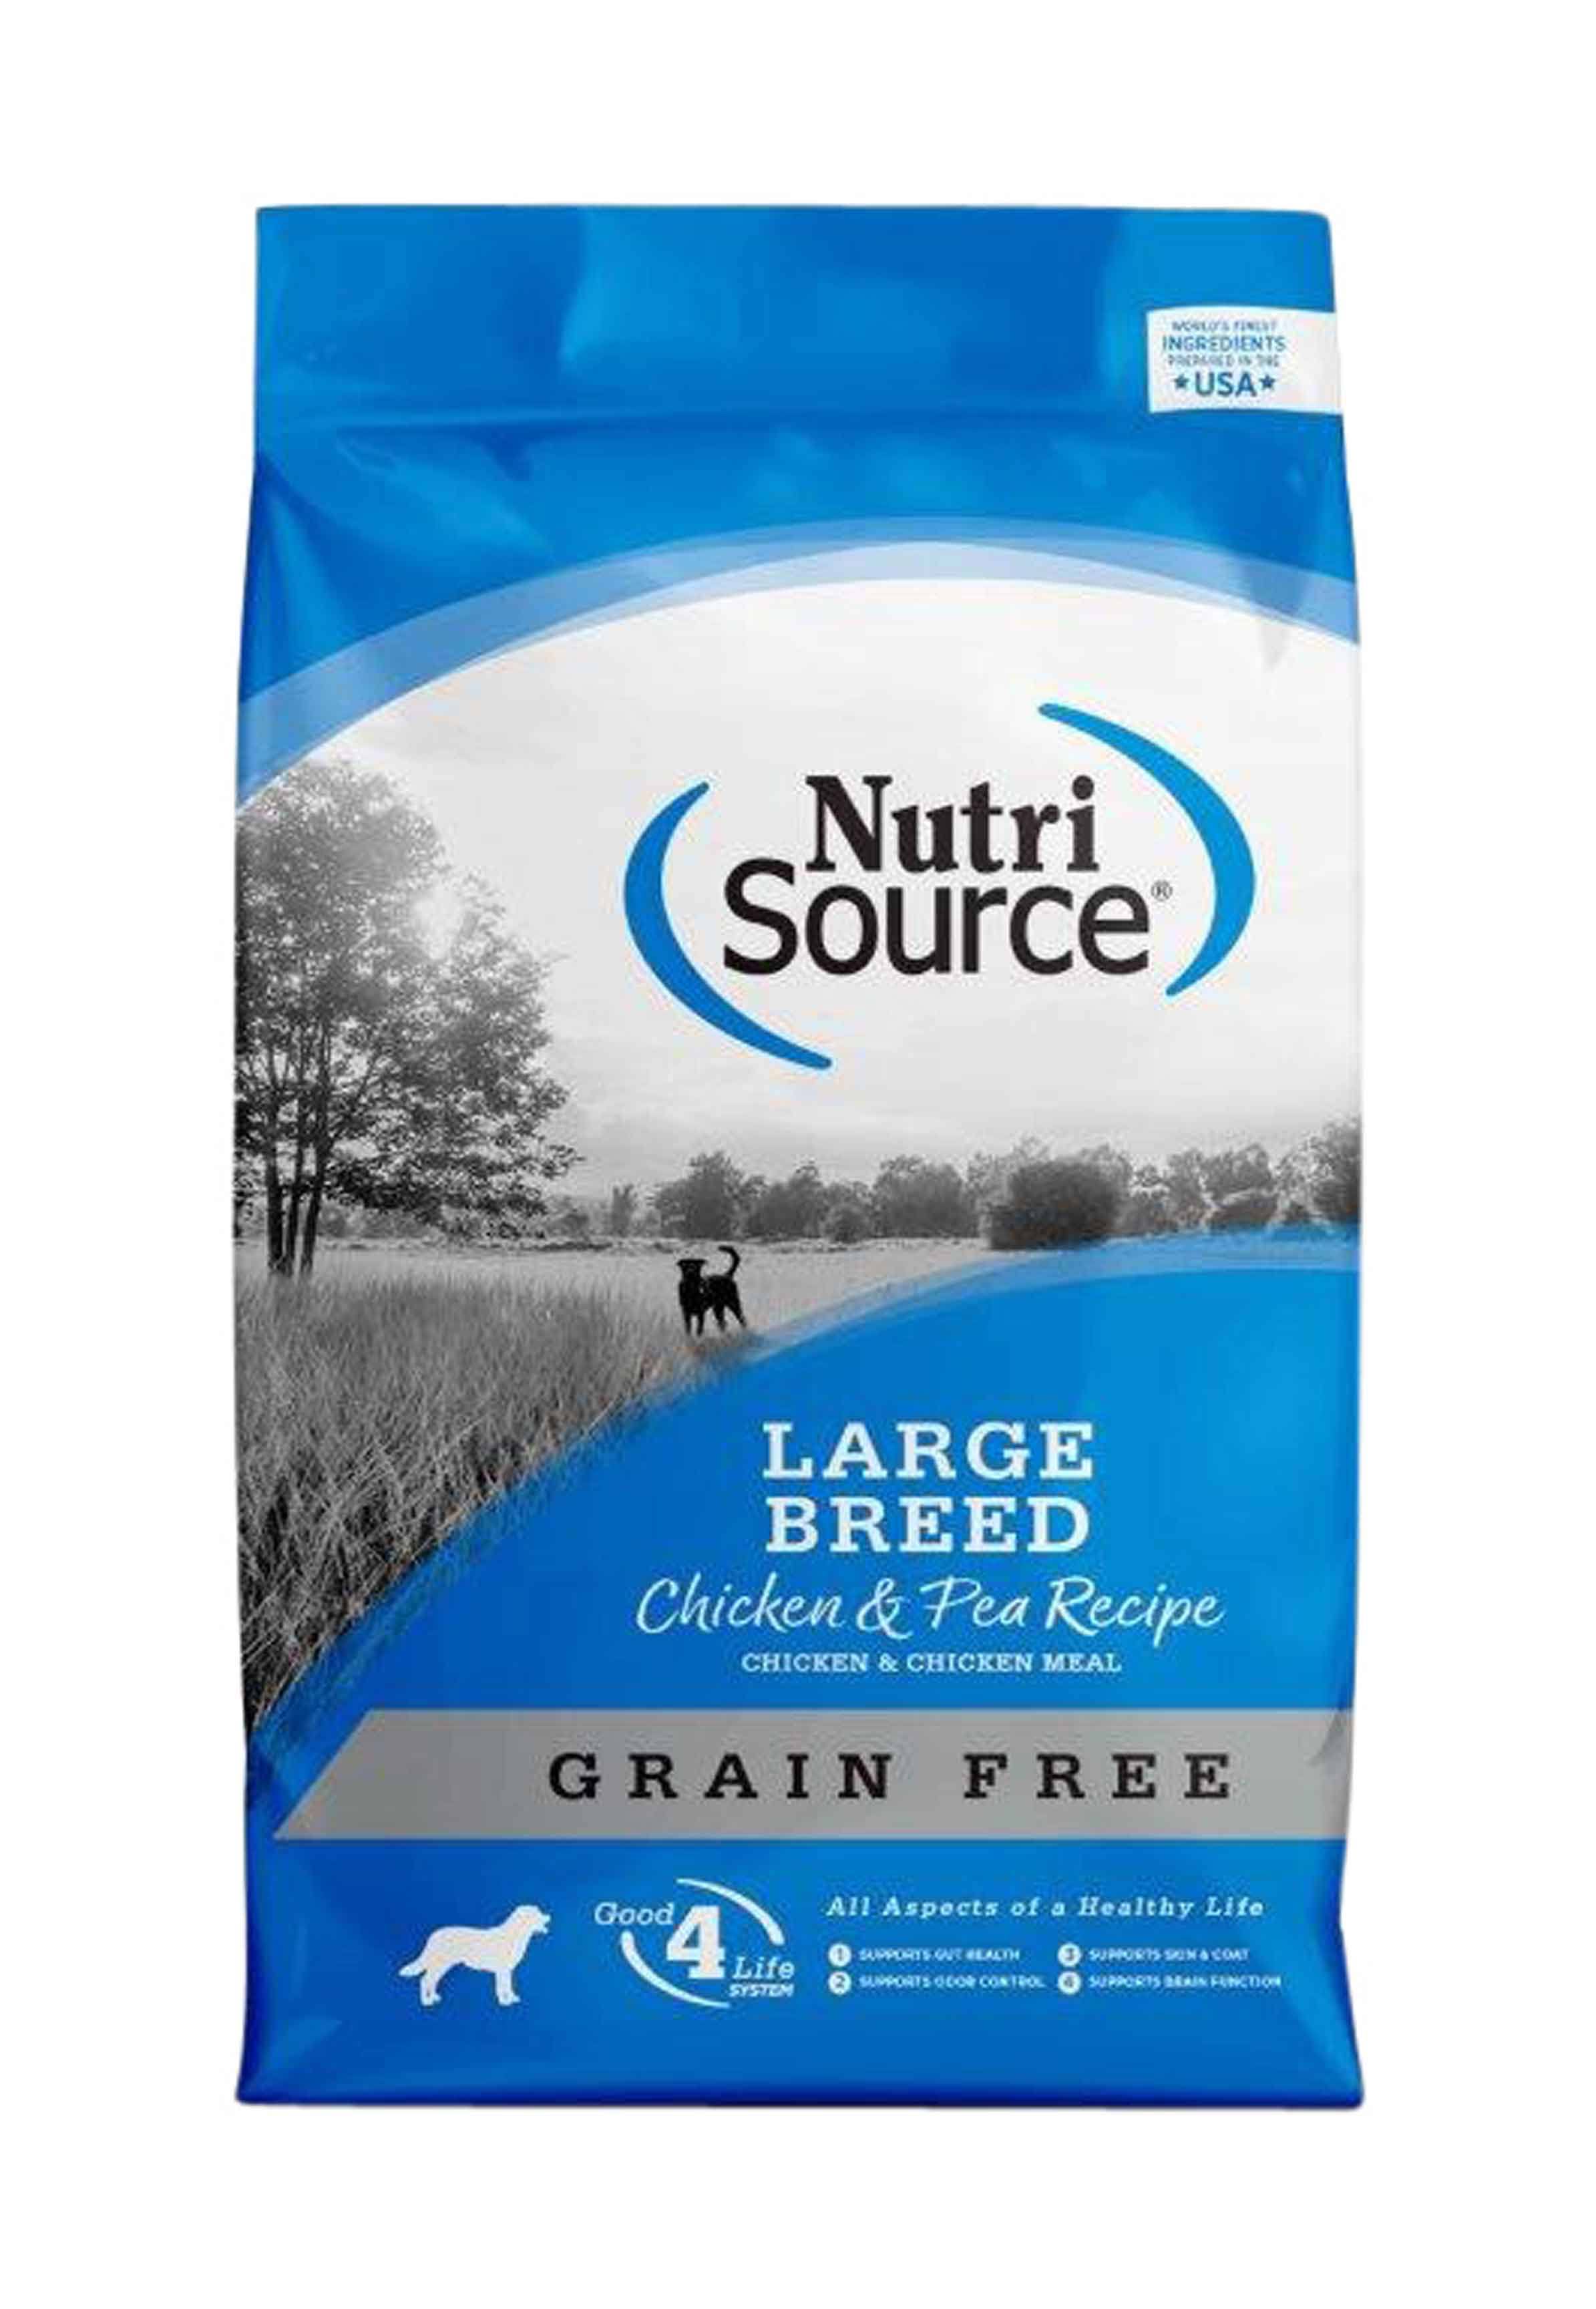 NutriSource Grain Free Large Breed Chicken and Pea Dry Dog Food, 30-lb